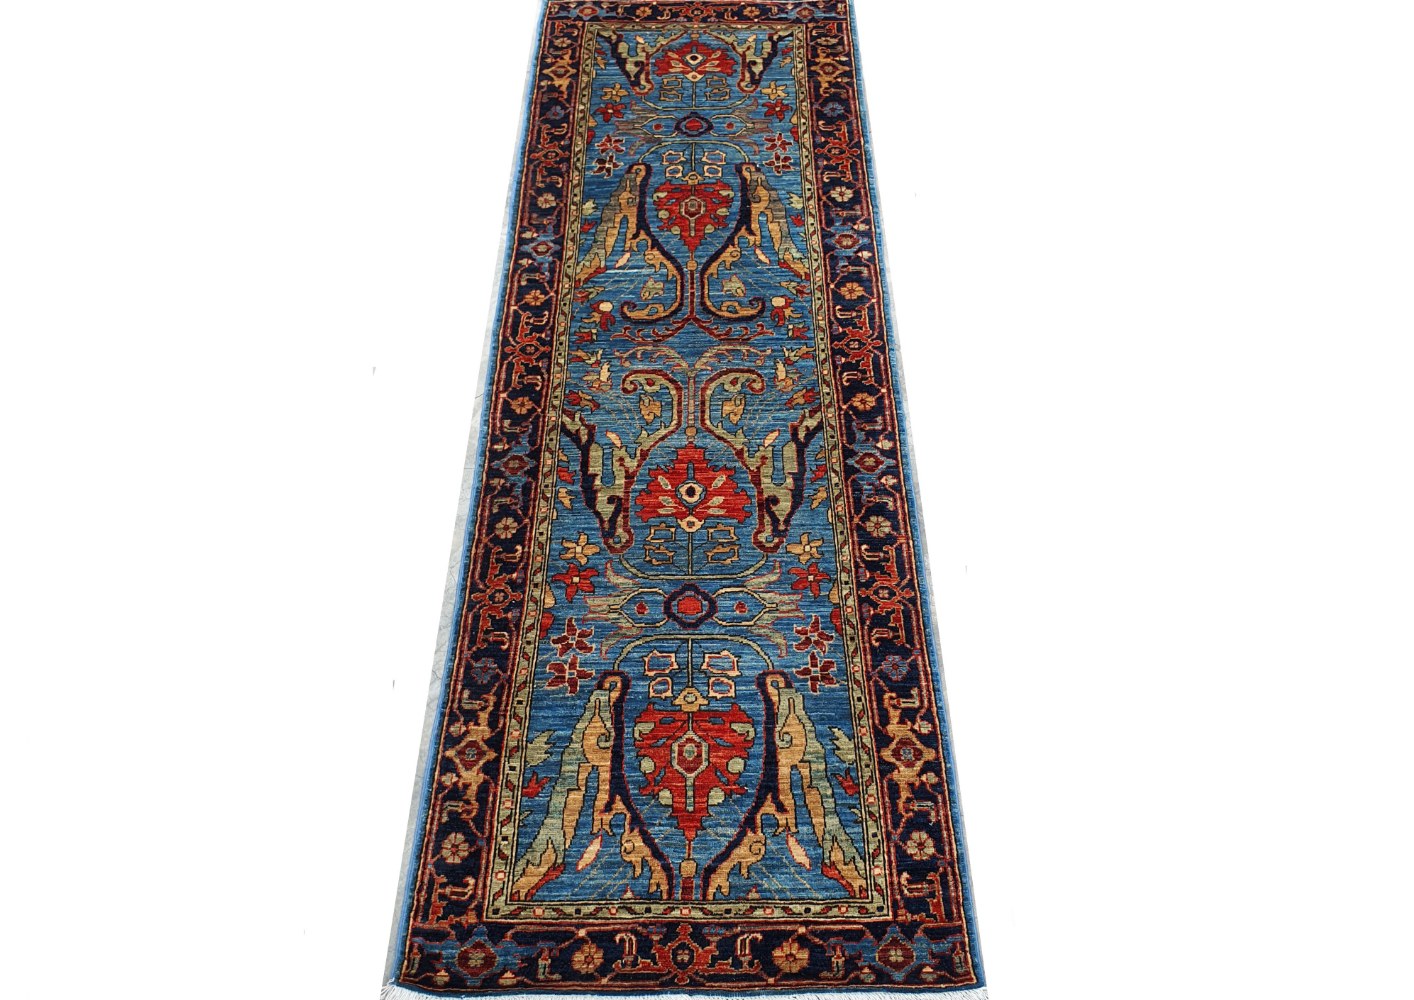 8 ft. Runner Aryana & Antique Revivals Hand Knotted Wool Area Rug - MR028178